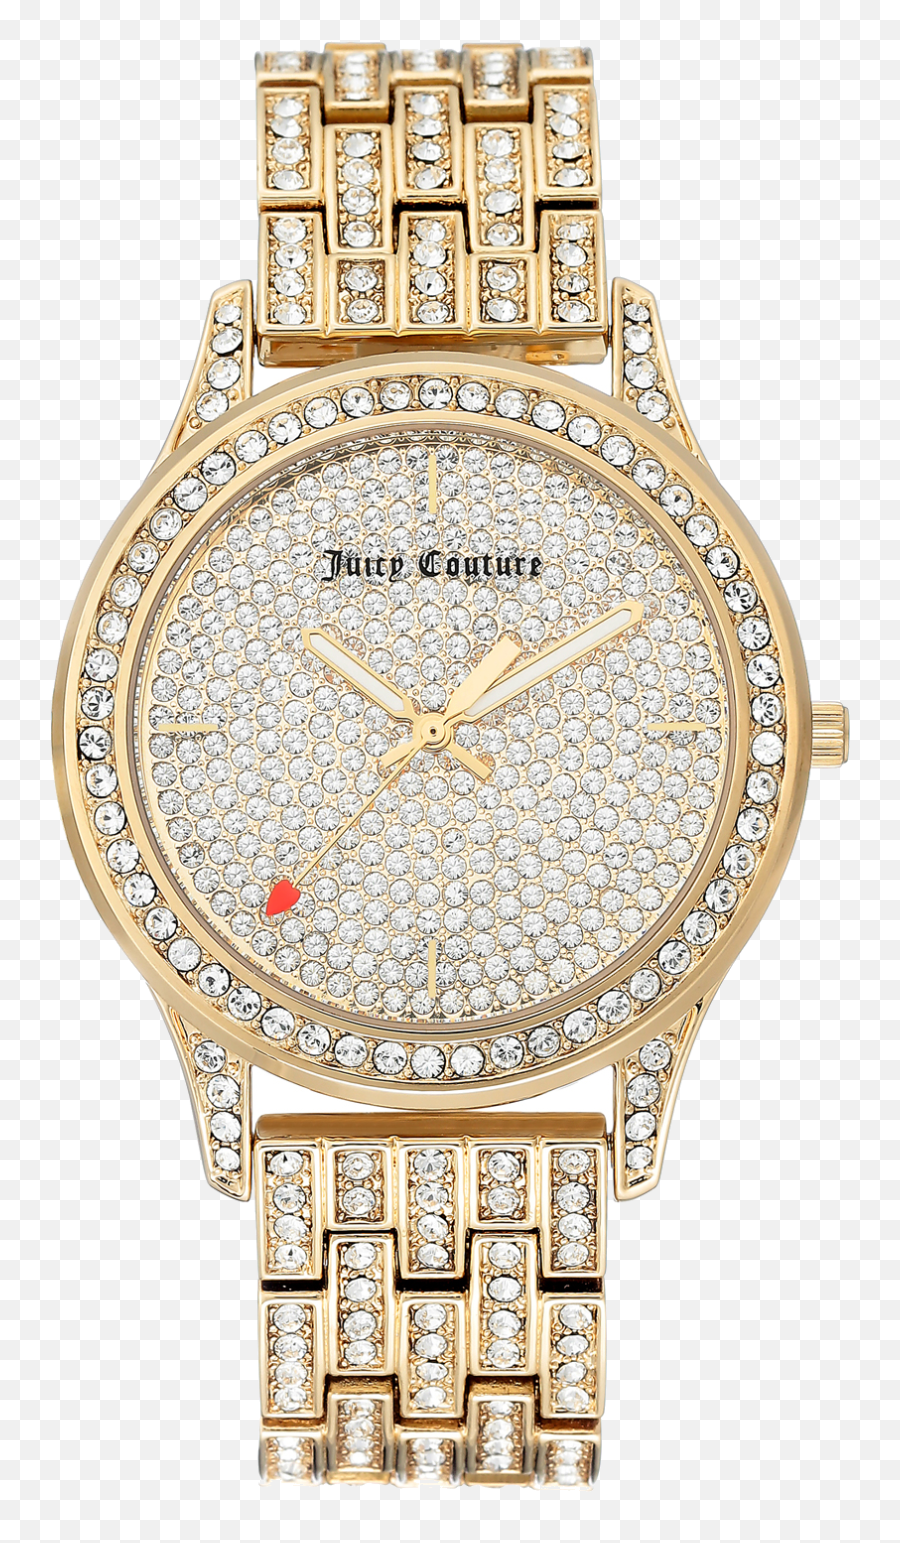 Juicy Couture Watch Iced - Juicy Couture Diamante Watch Emoji,Juicy Couture Logo